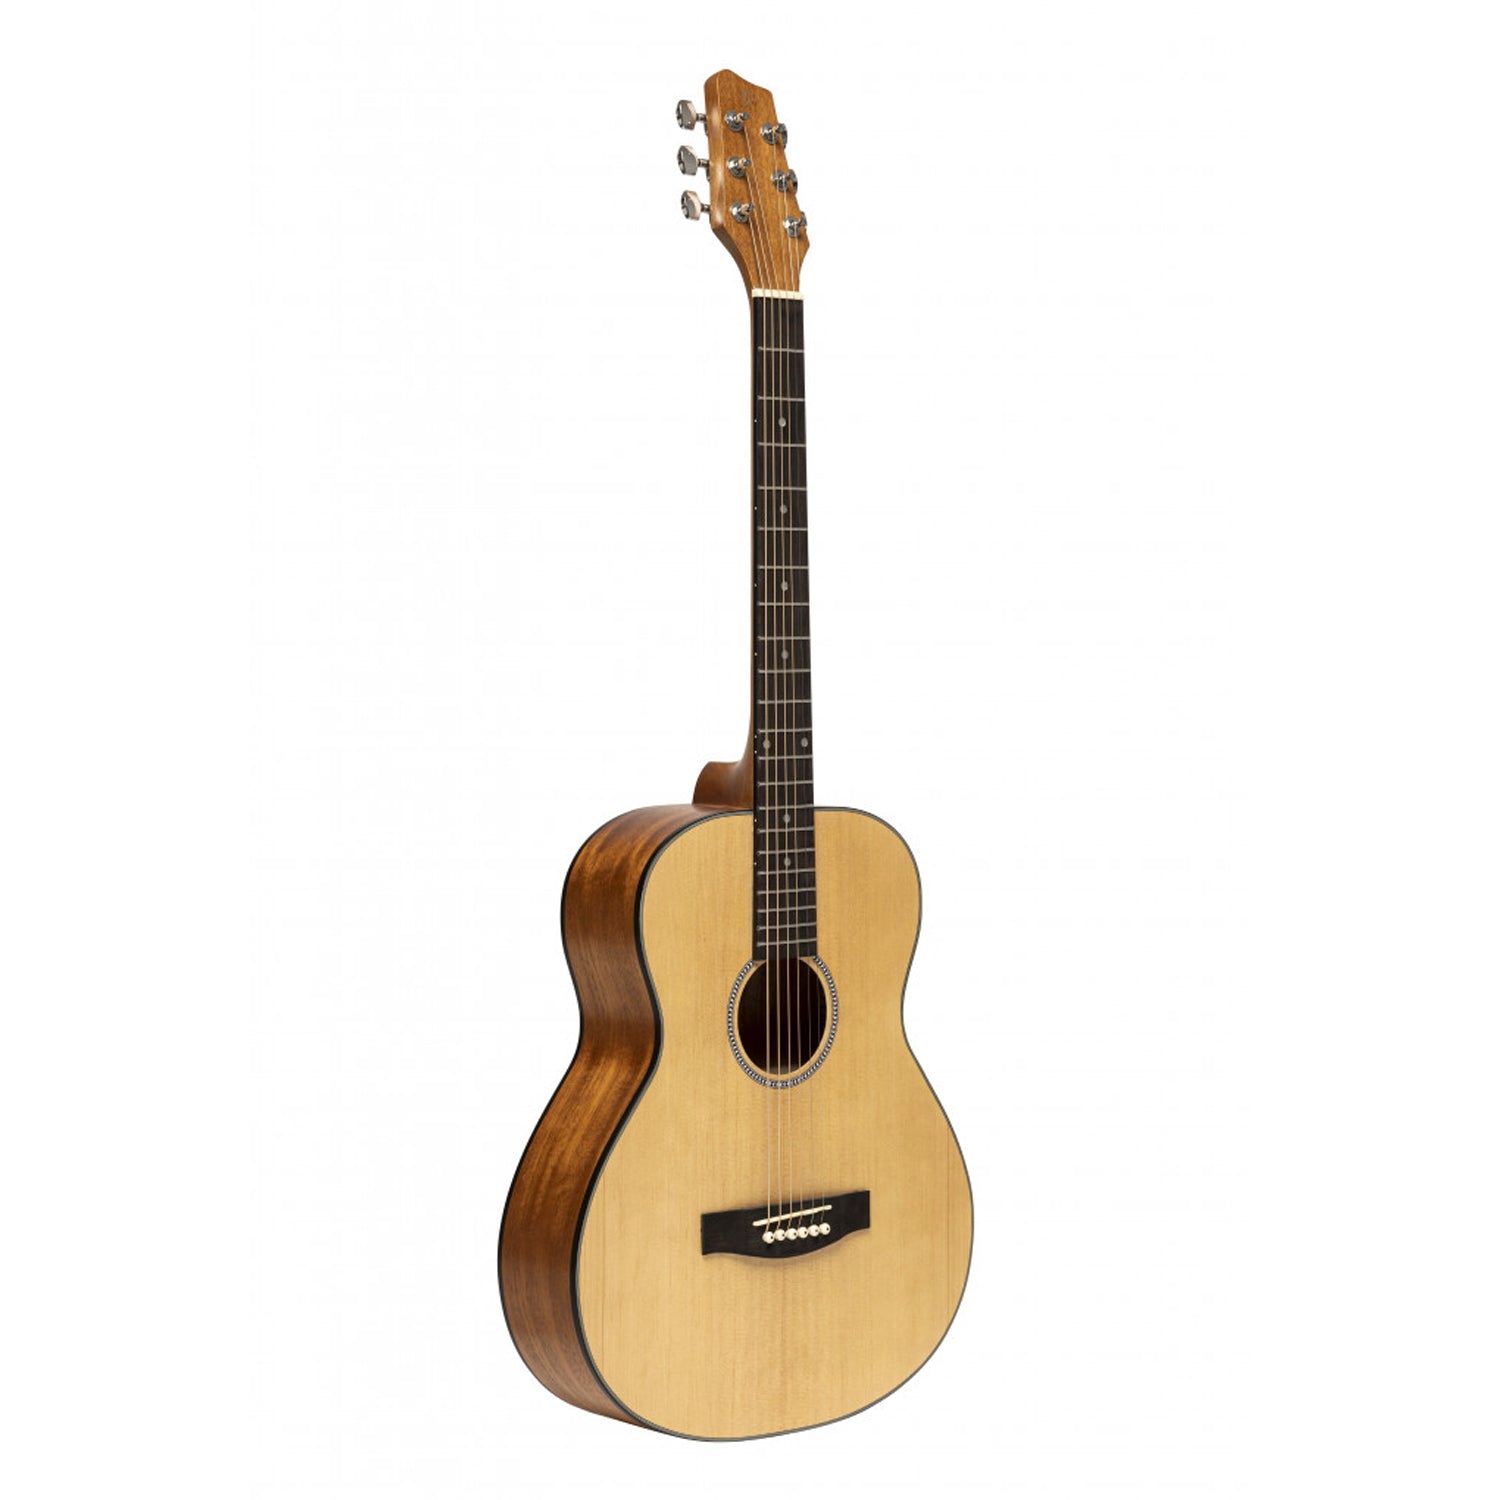 Stagg SA25 A SPRUCE Acoustic Auditorium guitar, Spruce, Natural Finish